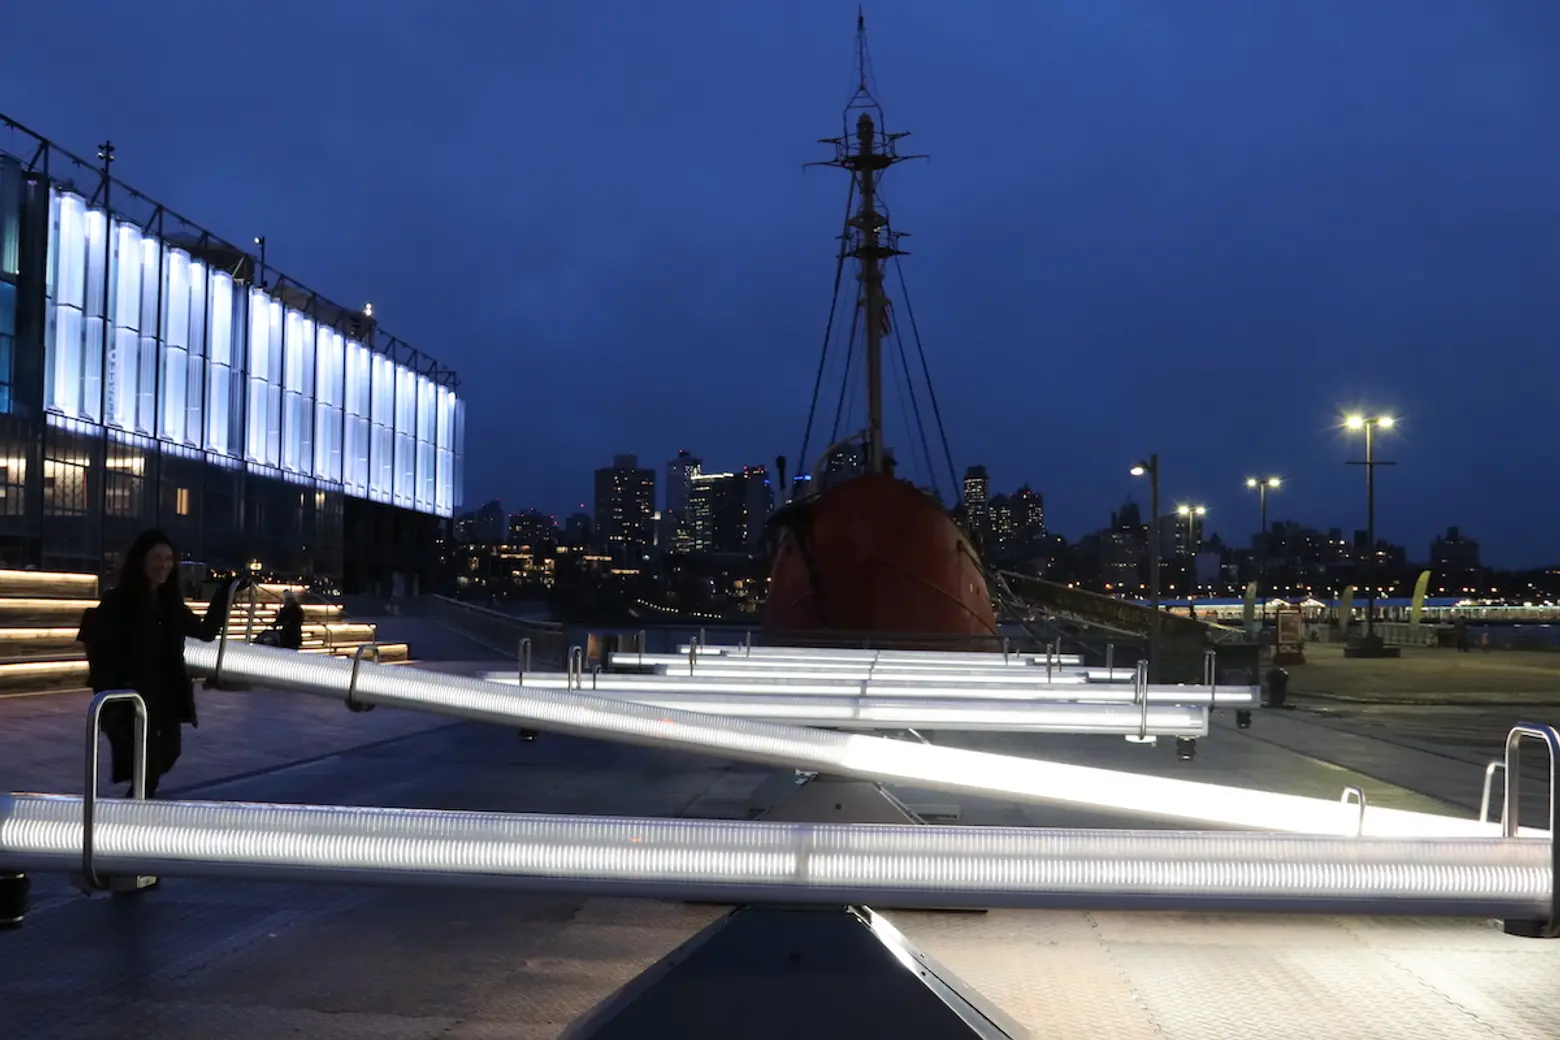 Head to Pier 17 to ride a sonic wave of illuminated seesaws in a new public art installation